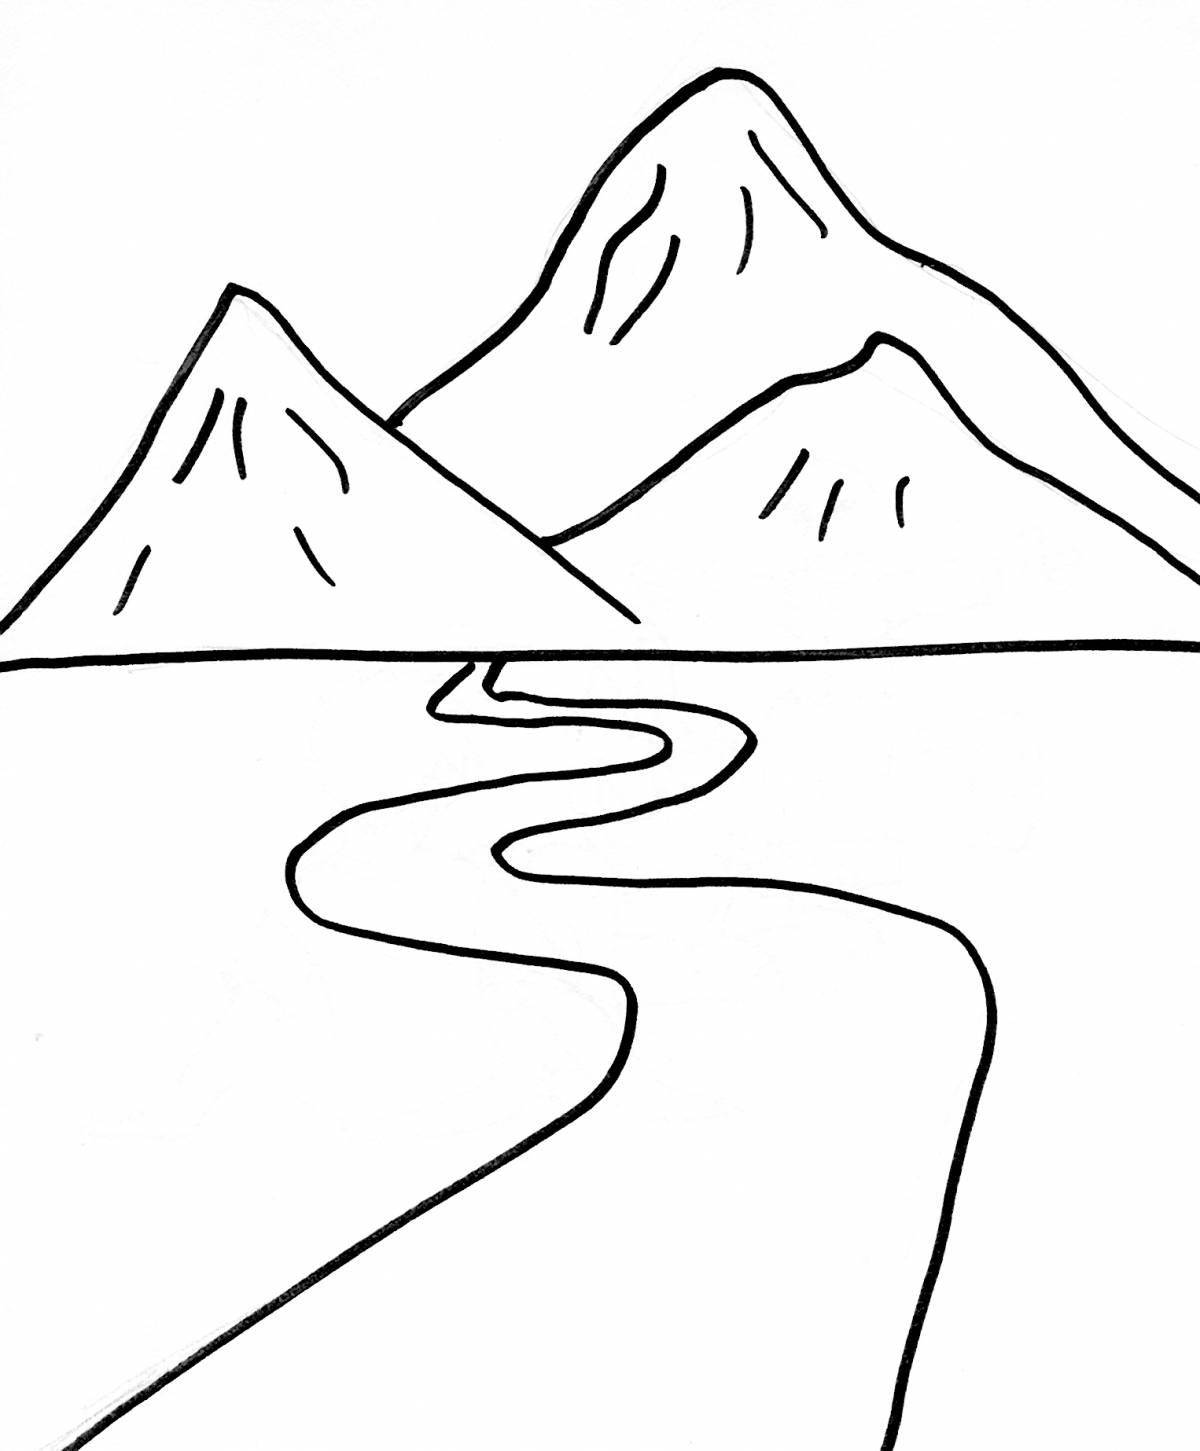 Calming mountain coloring page for kids